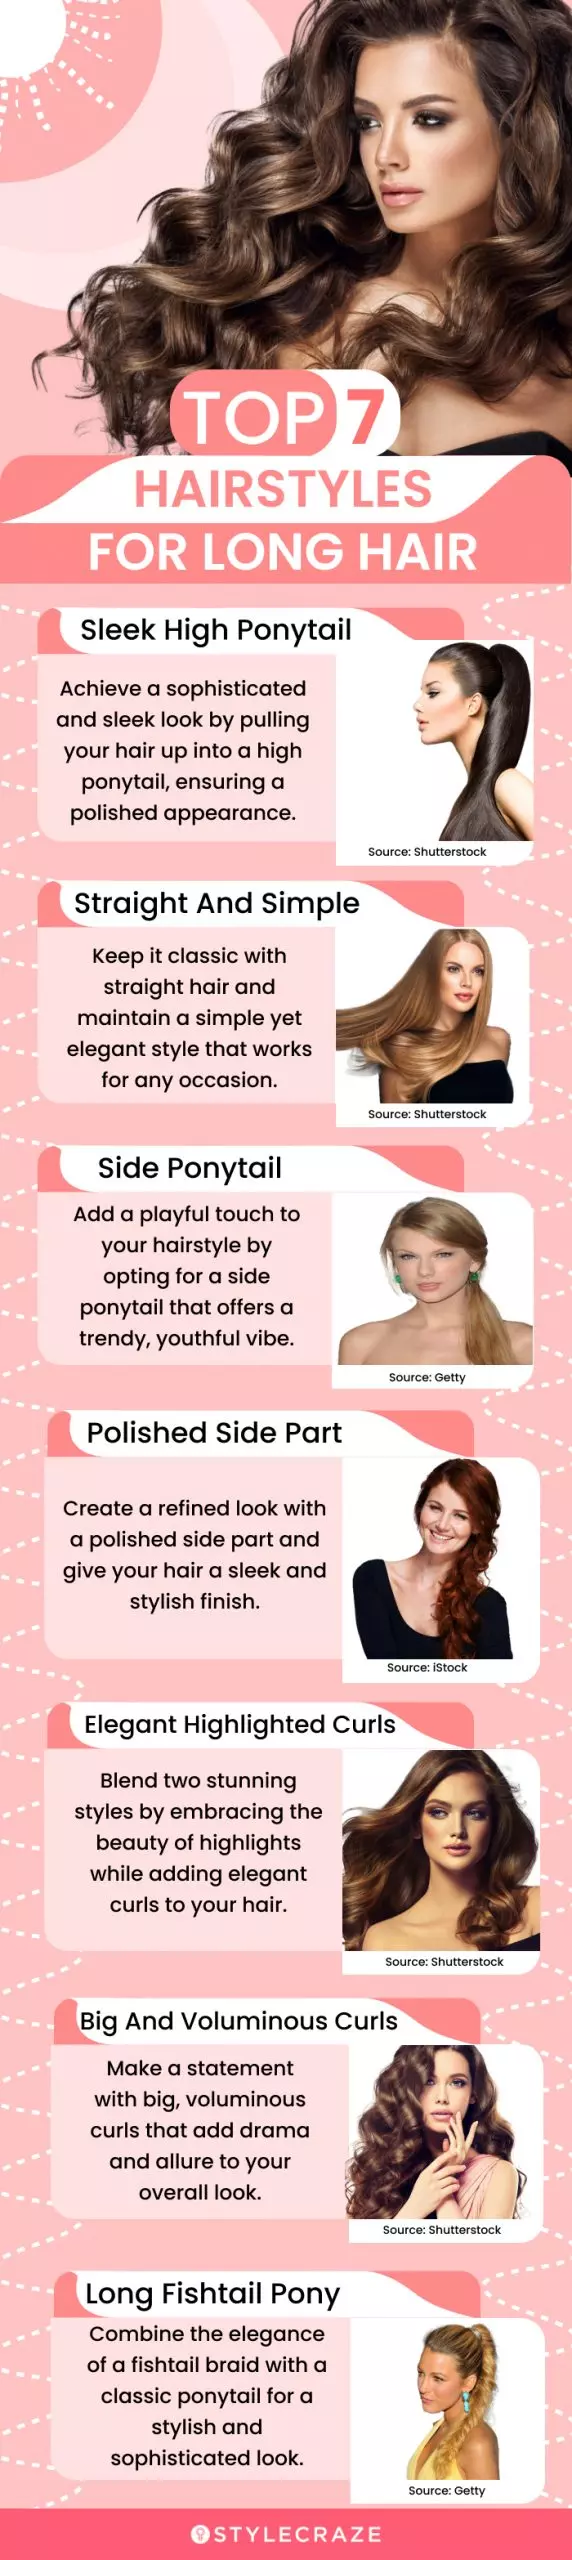 Easy Updo Hairstyle for Long Hair - Wedding, Bridal, Prom, Homecoming